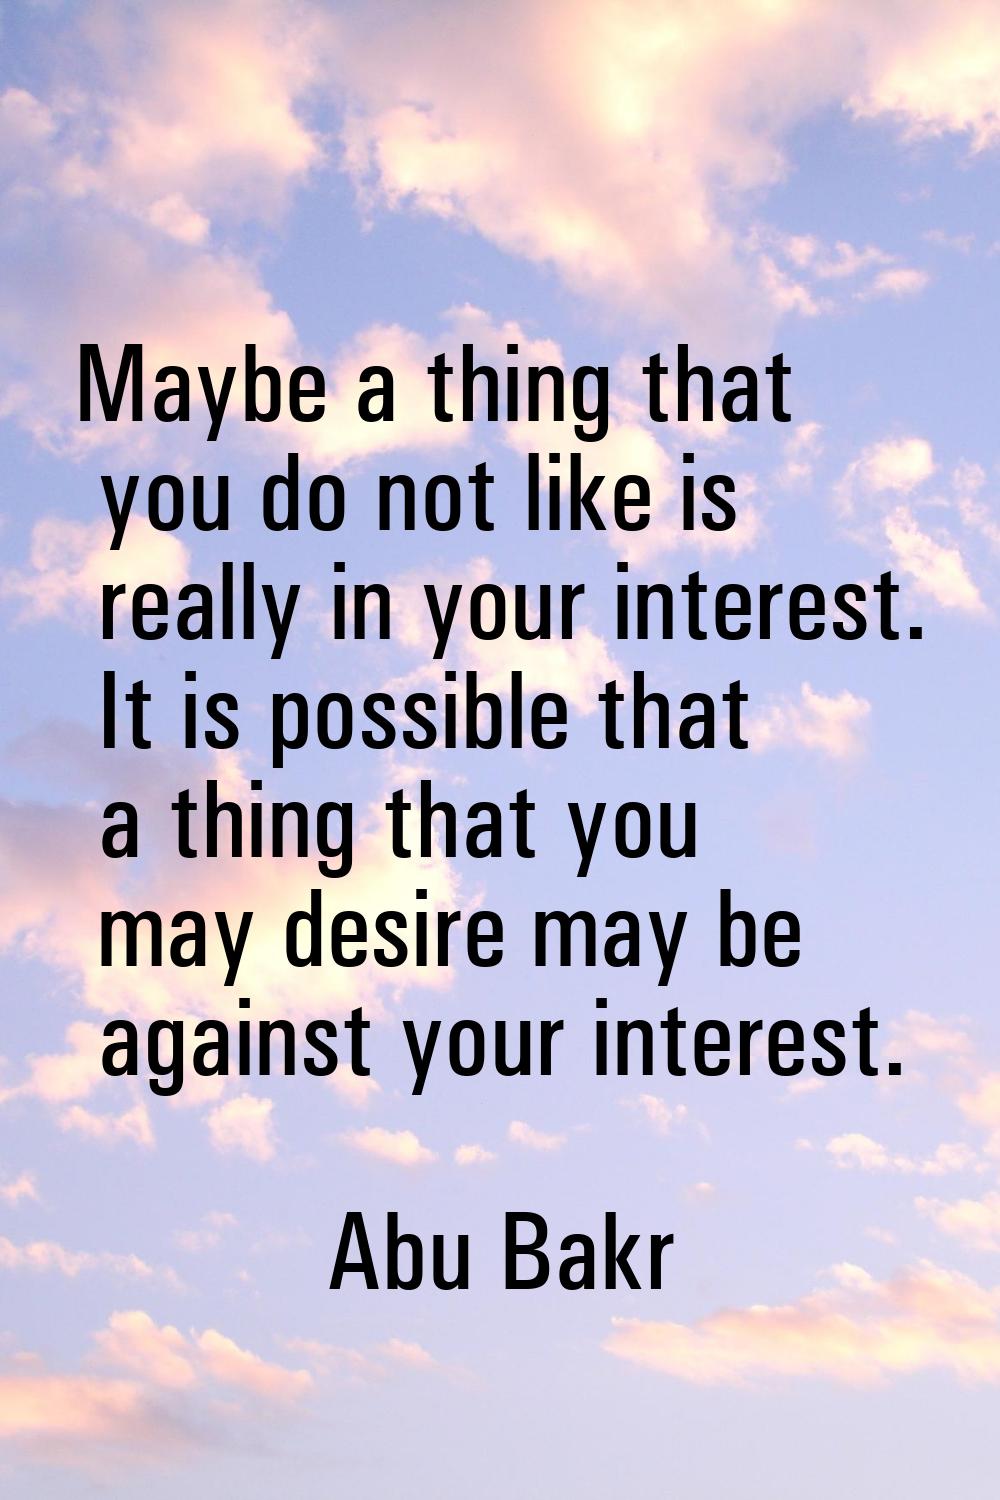 Maybe a thing that you do not like is really in your interest. It is possible that a thing that you